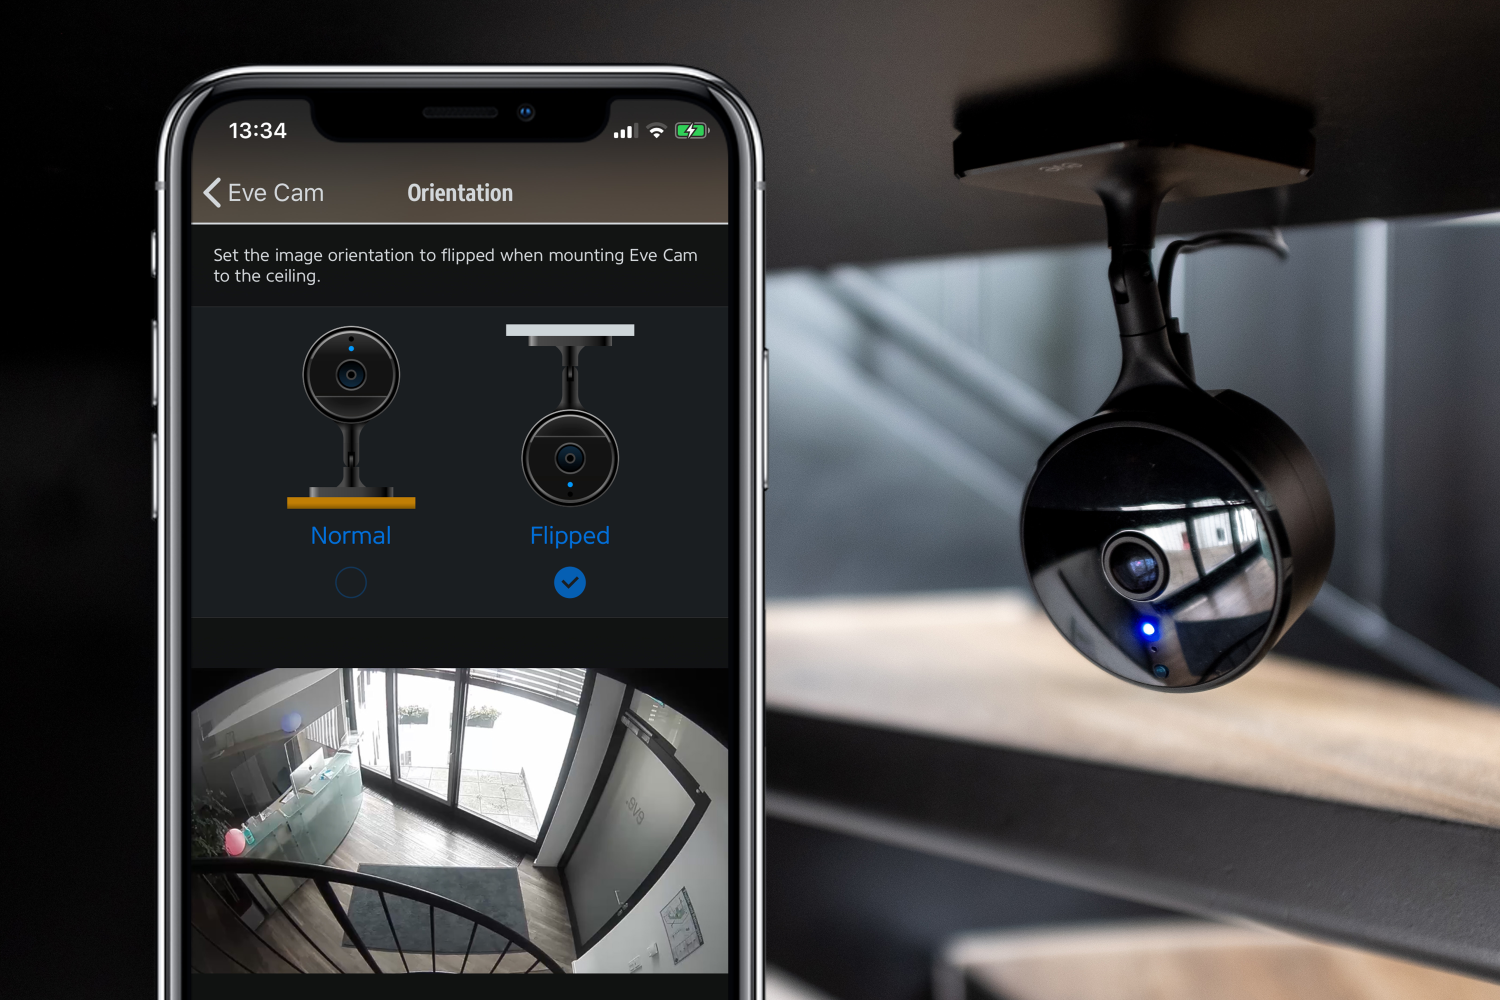 Version 4.5 of the Eve app adds ‘My Cameras’ feature, more